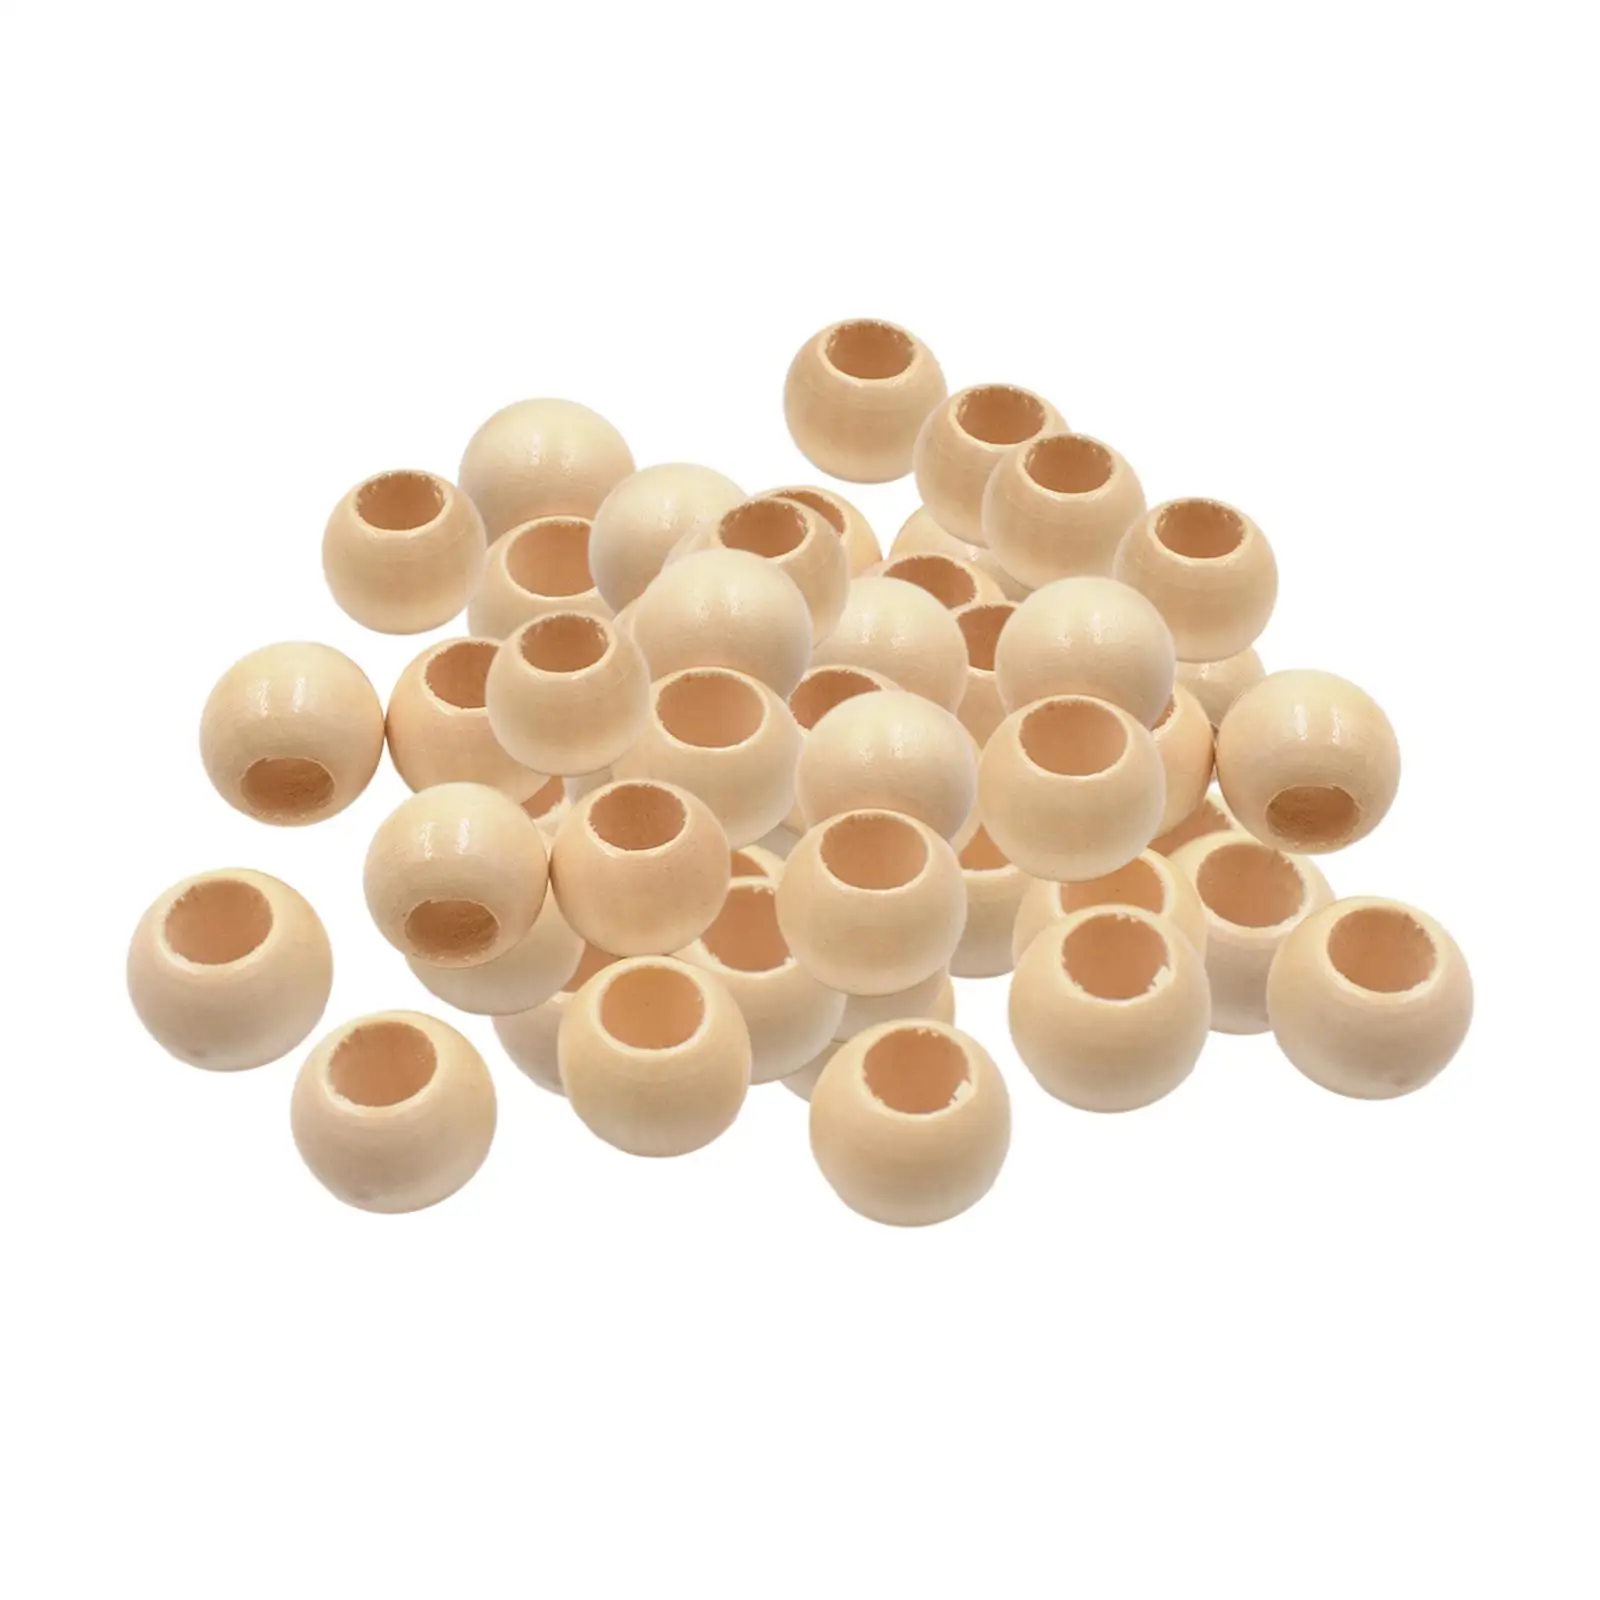 100 Pieces Wooden Beads DIY Crafts with Holes Circular Bead Loose Spacer Beads Round Beads for Jewelry Accessories Decoration